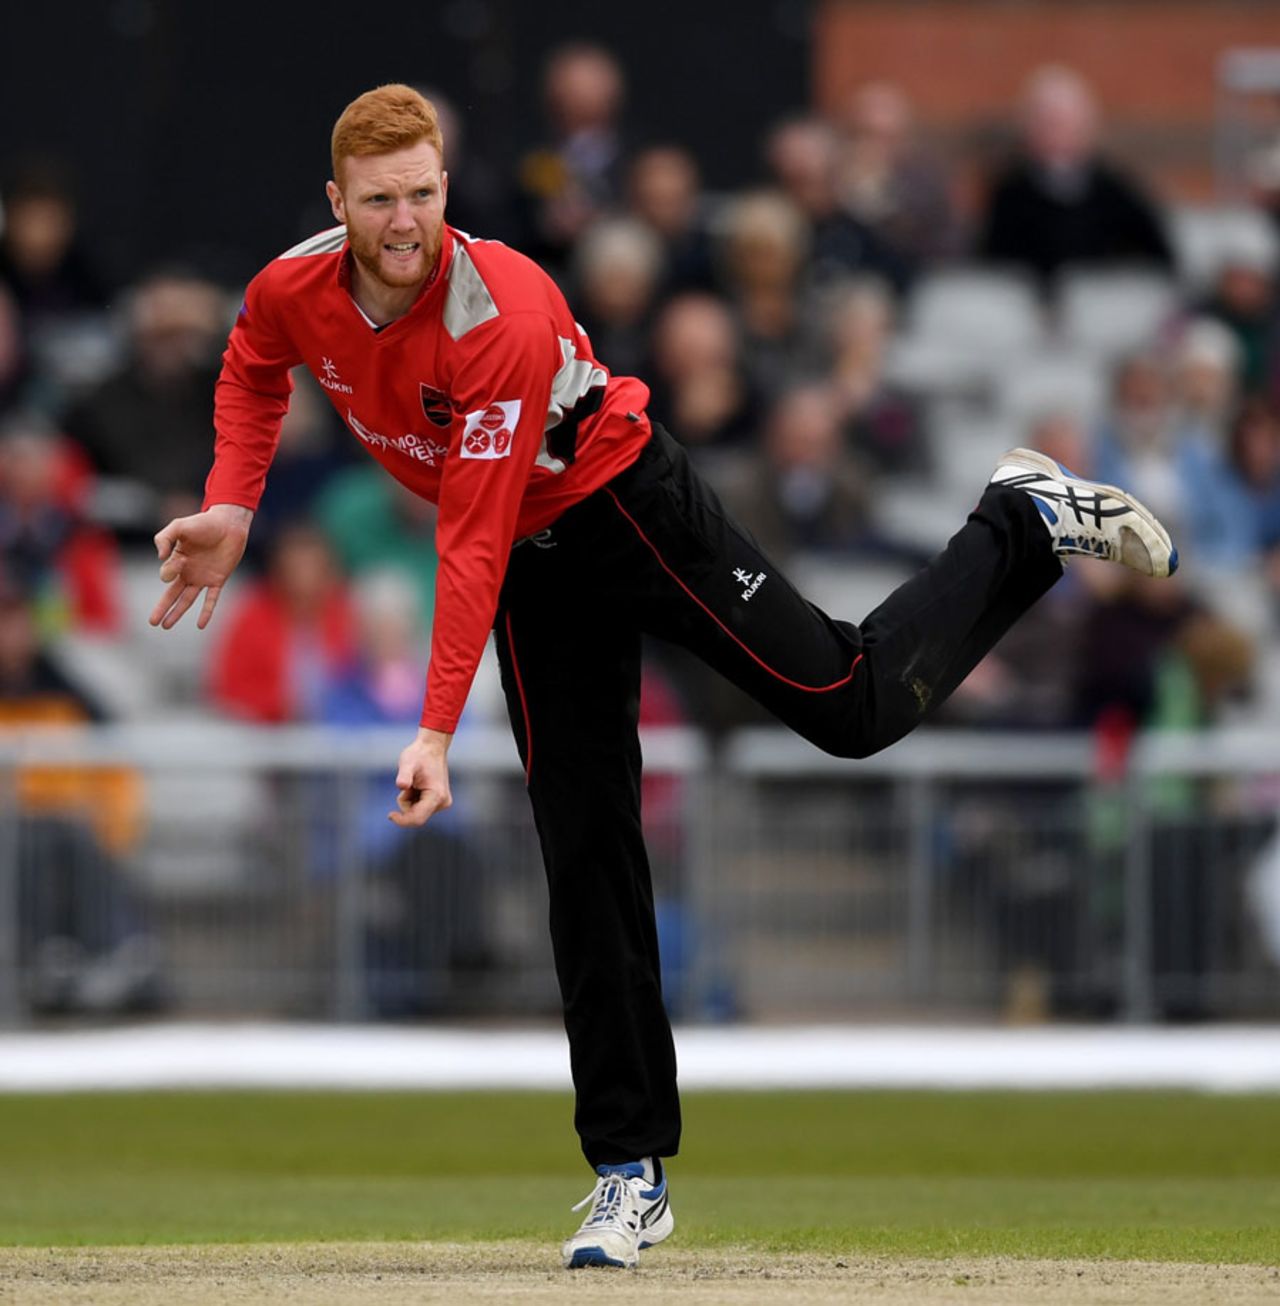 James Sykes collected a four-wicket haul, Lancashire v Leicestershire, Royal London Cup, North Group, Old Trafford, April 28, 2017